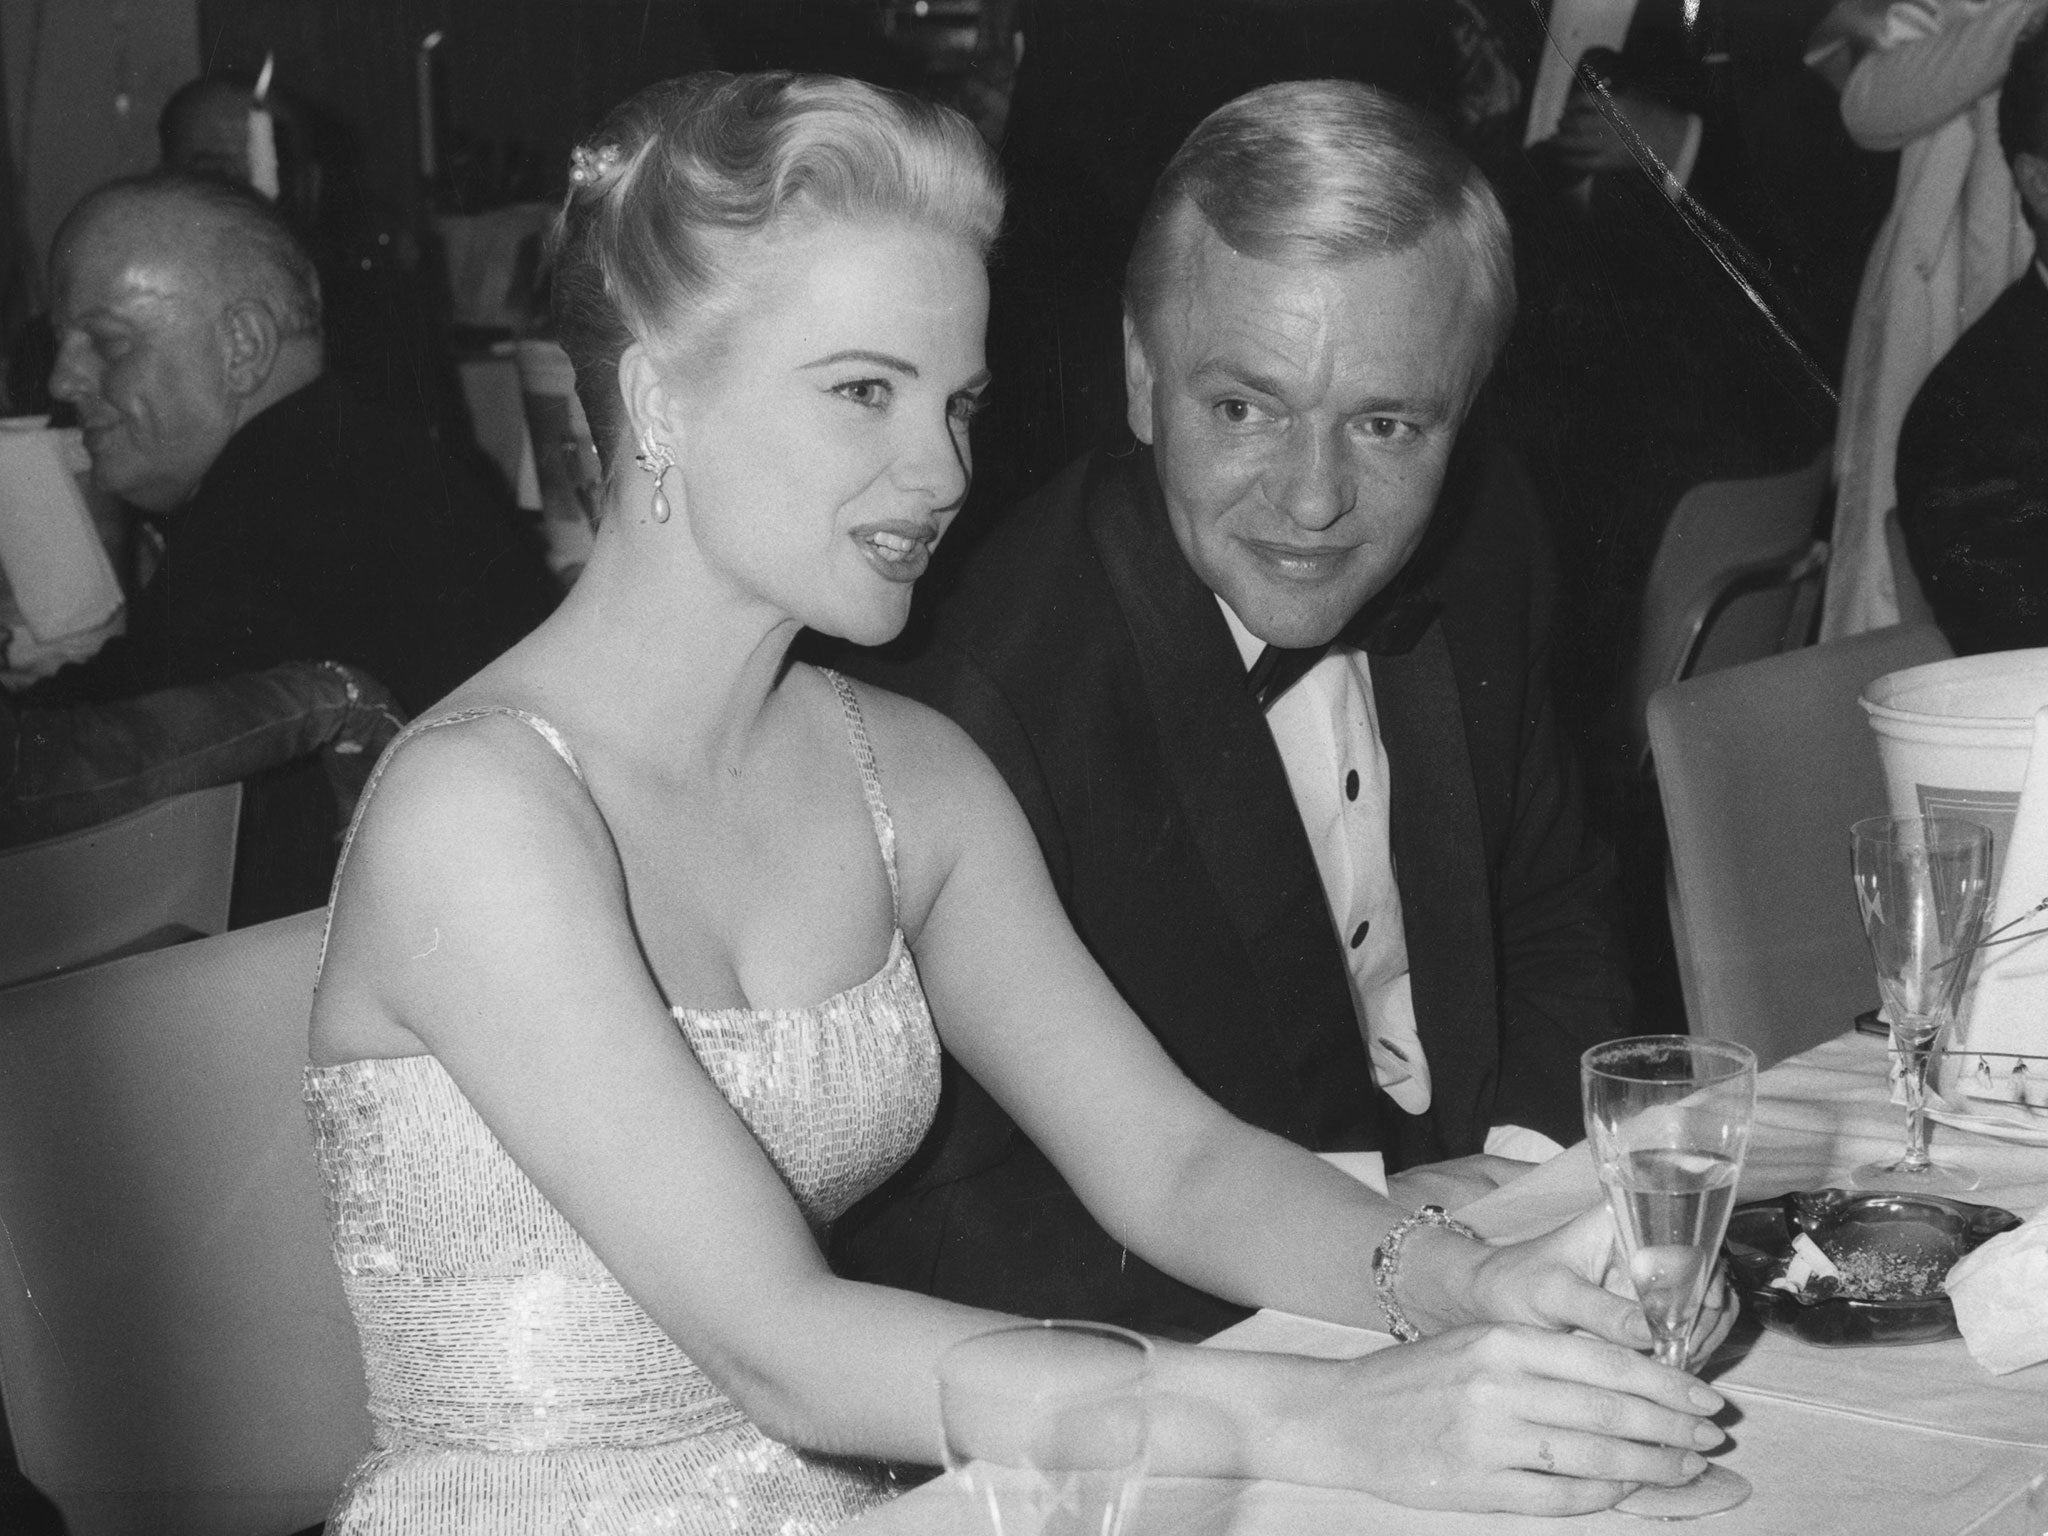 American actress Martha Hyer and Peter van Eyck at the 1960 Film Ball at the Hilton Hotel in Berlin